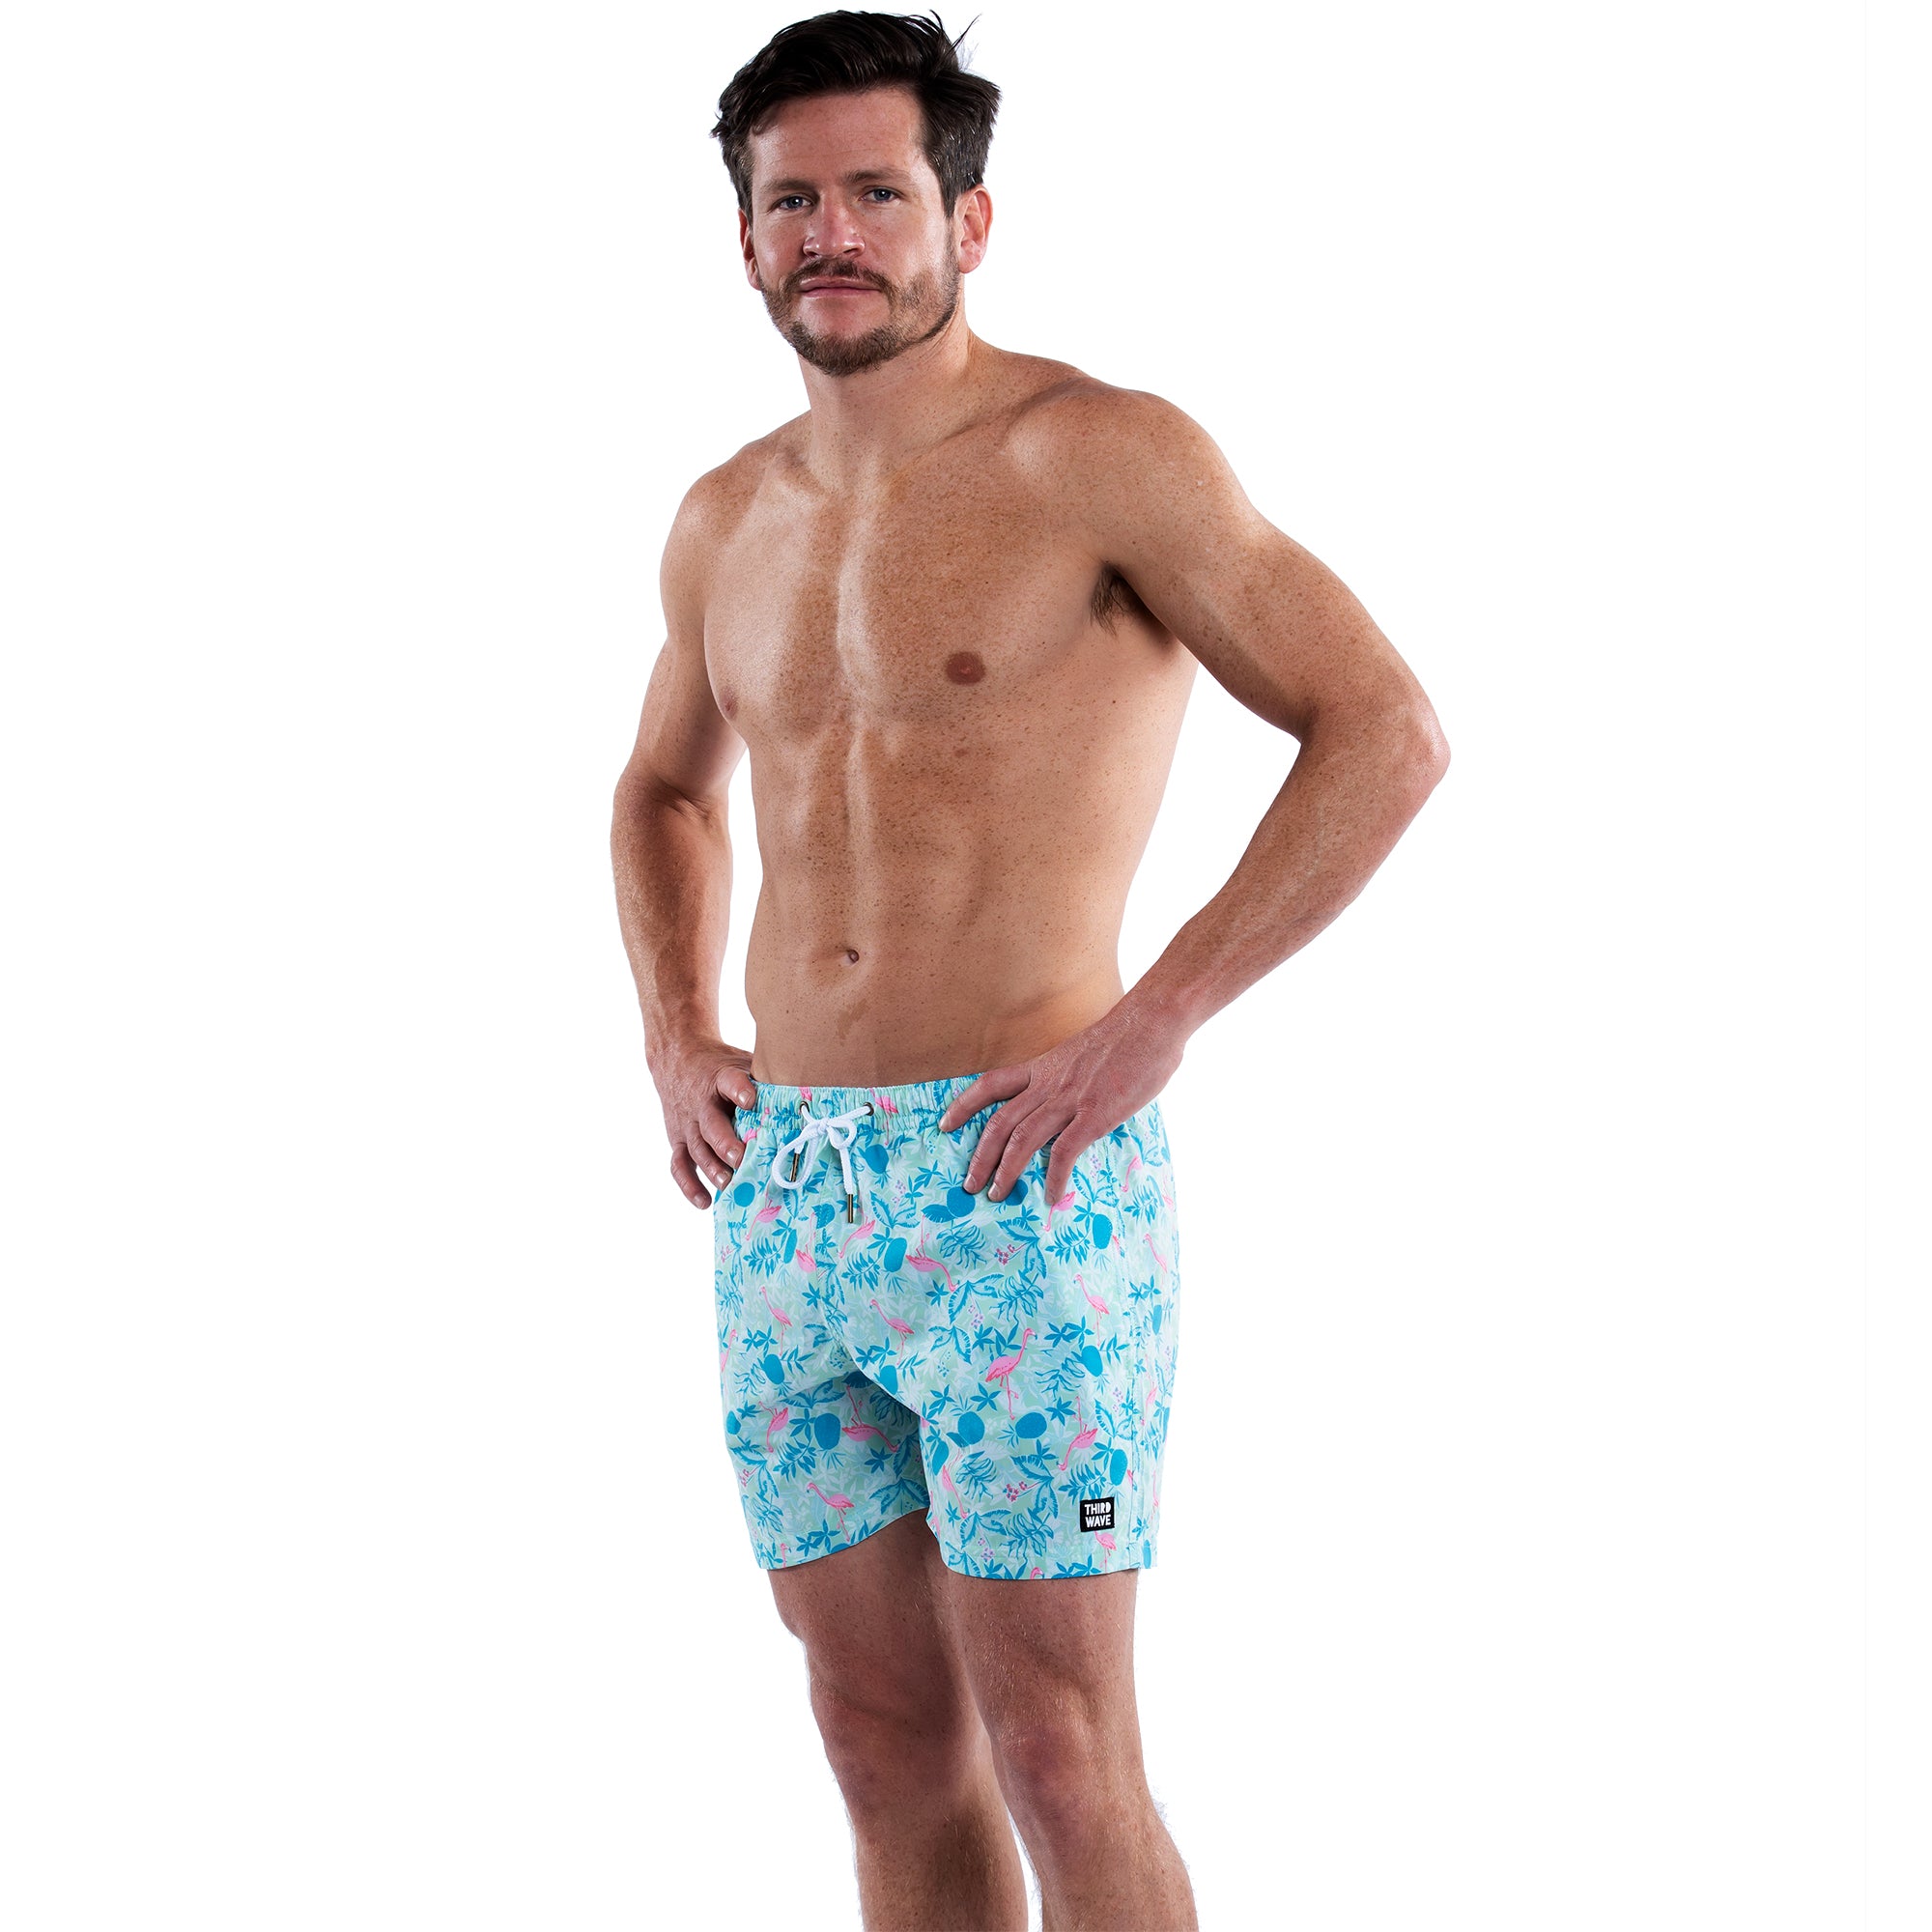 Buy Third Wave Swim Trunks with Compression Liner - Men's Premium 5 Inch  Inseam Quick Dry Swim Shorts for Beach and Swimming, Aloha, Small at